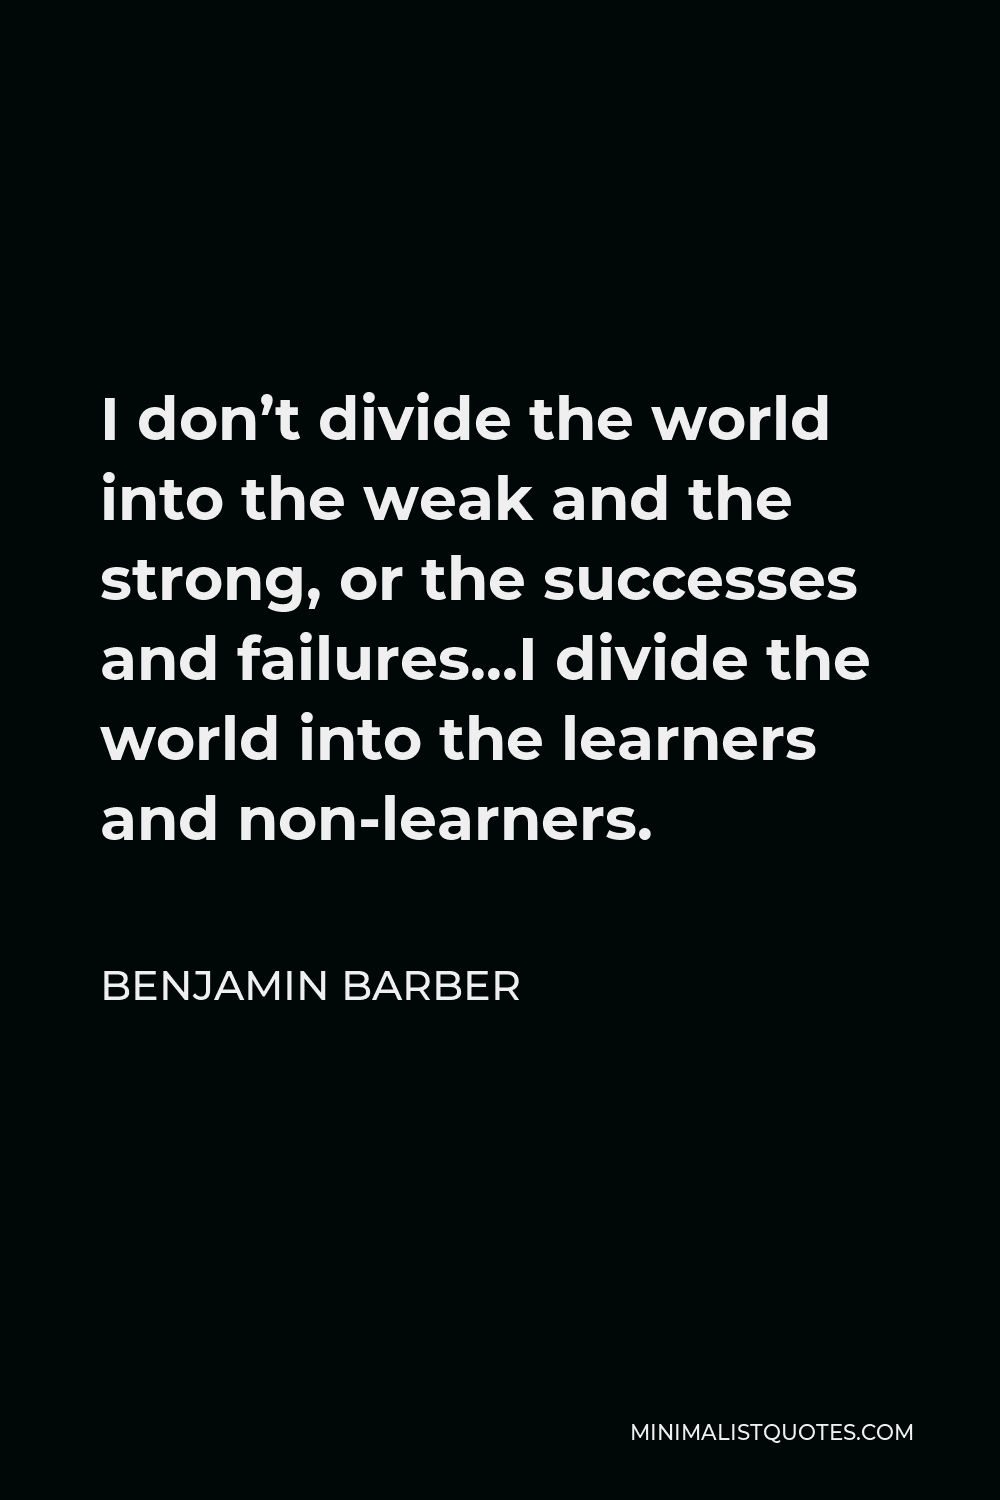 Benjamin Barber Quote - I don’t divide the world into the weak and the strong, or the successes and failures…I divide the world into the learners and non-learners.